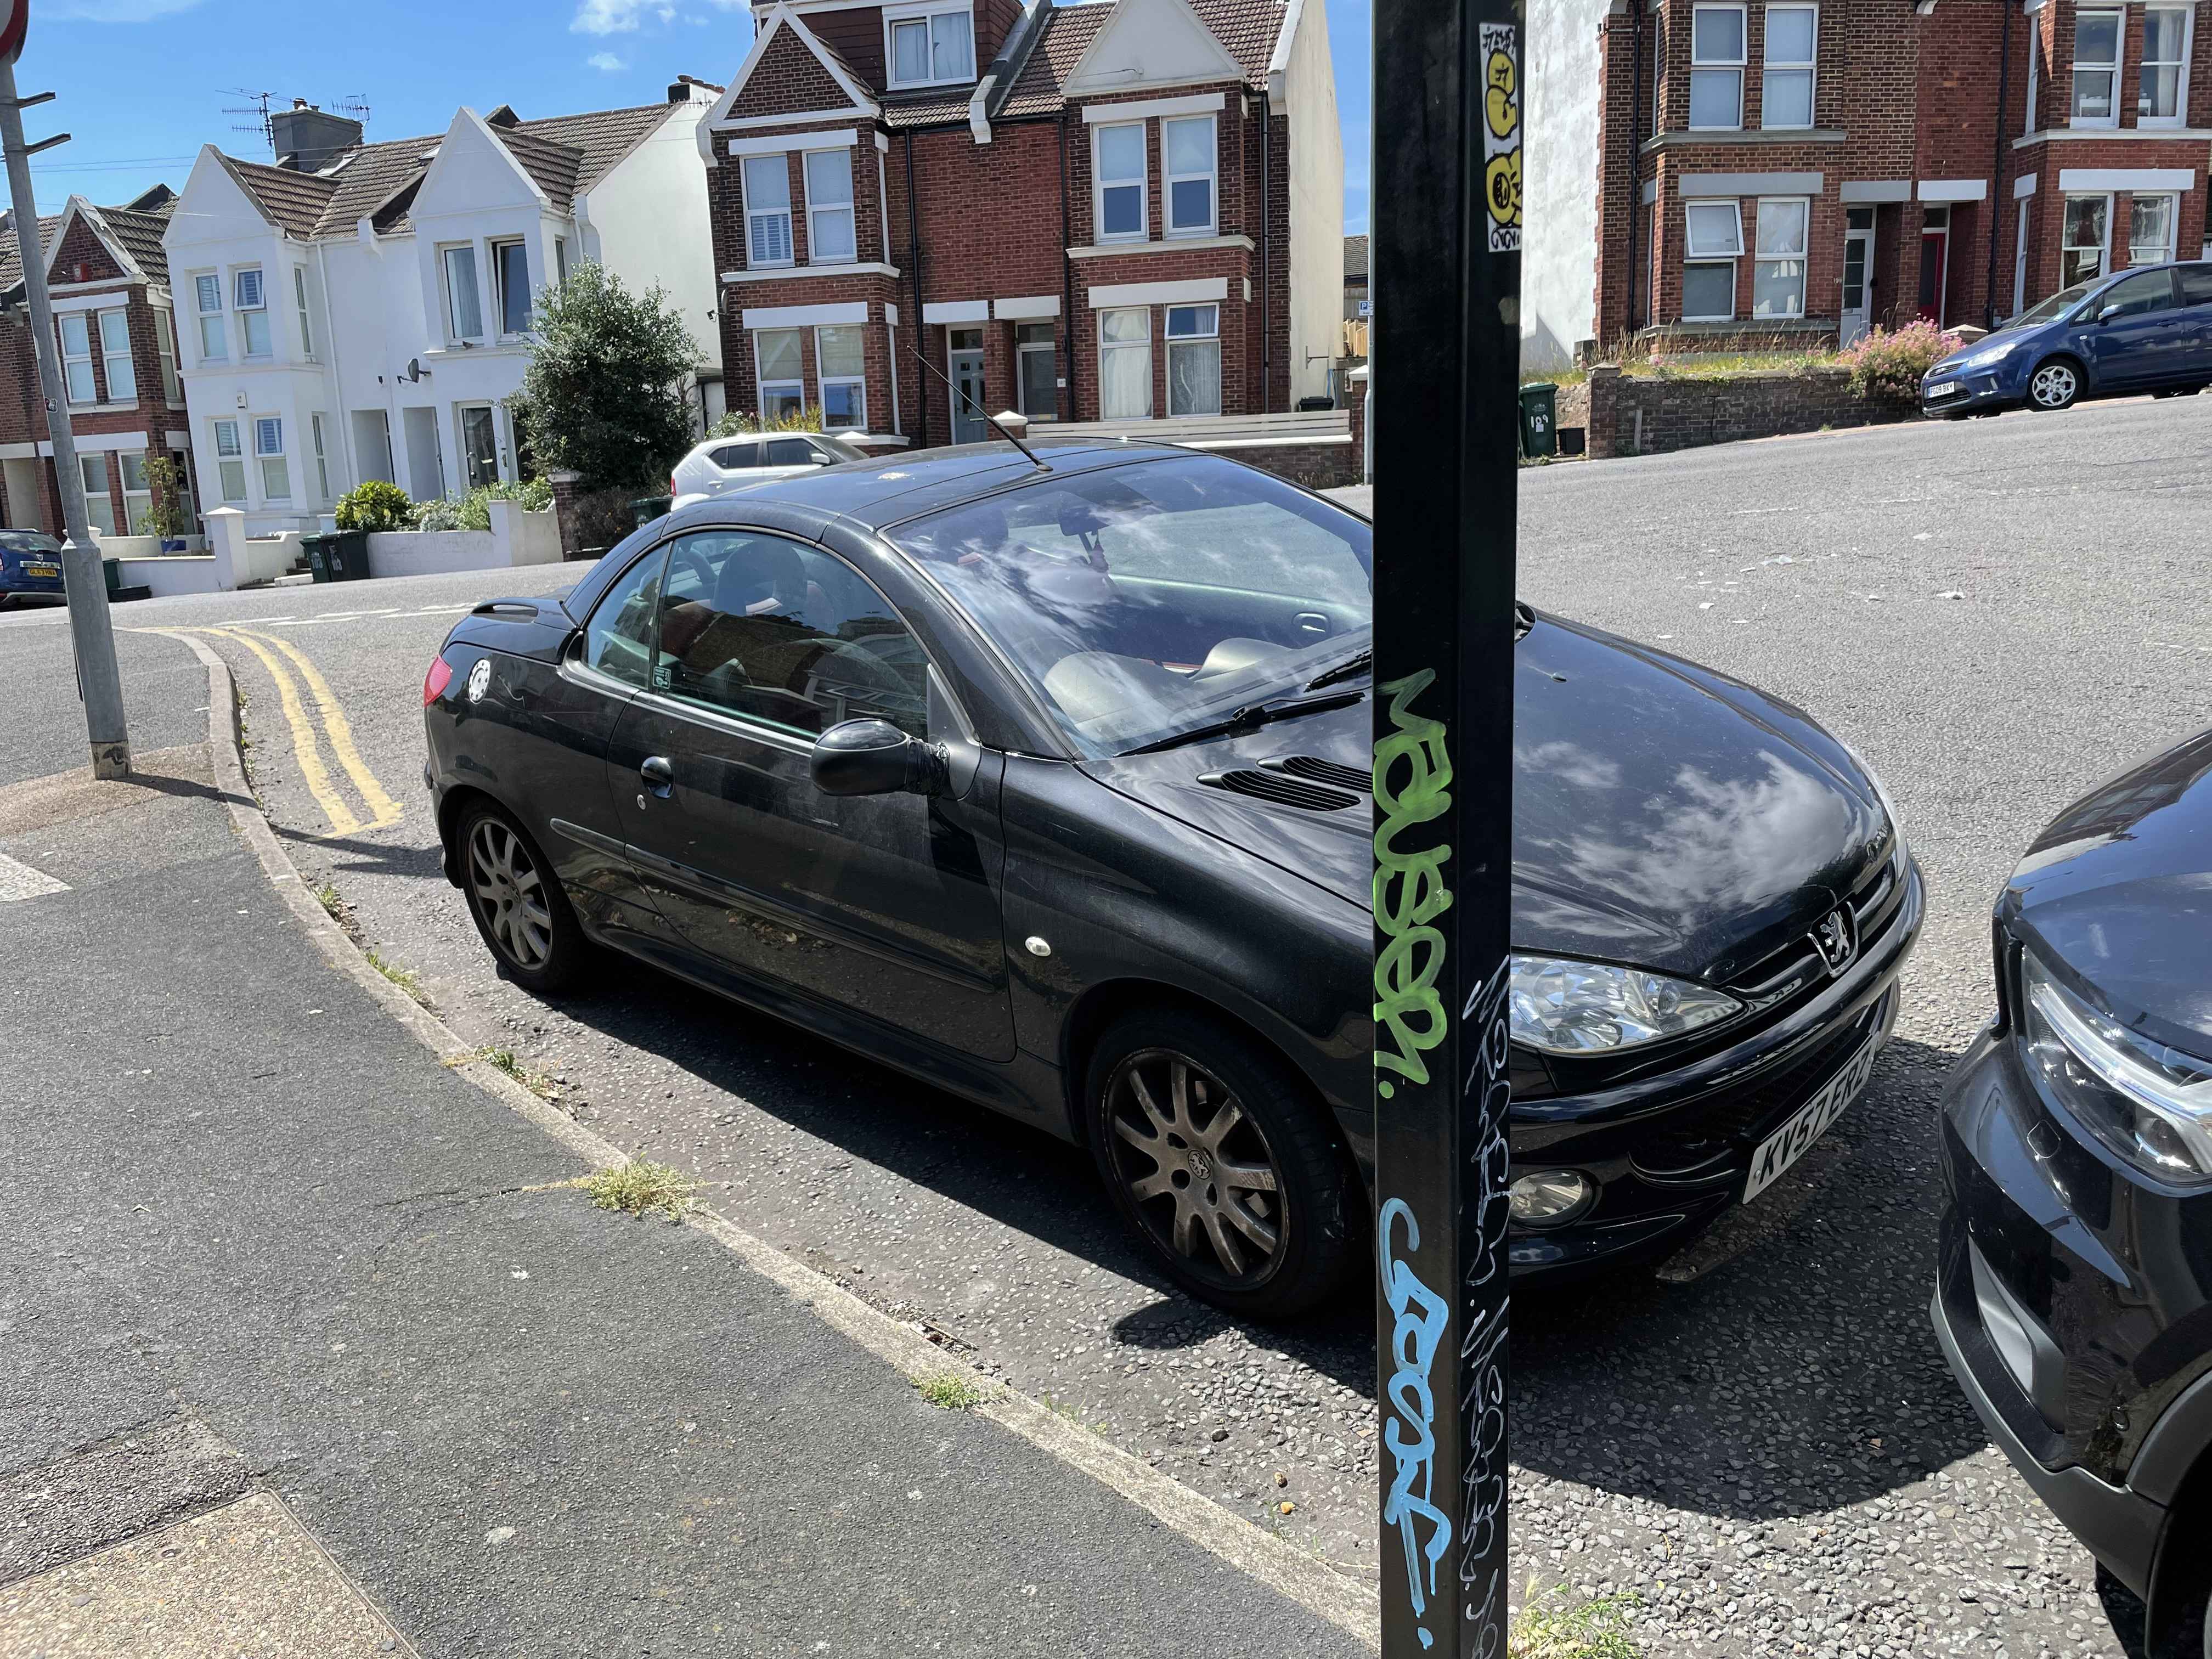 Photograph of KV57 ERZ - a Black Peugeot 206 parked in Hollingdean by a non-resident. The second of eight photographs supplied by the residents of Hollingdean.